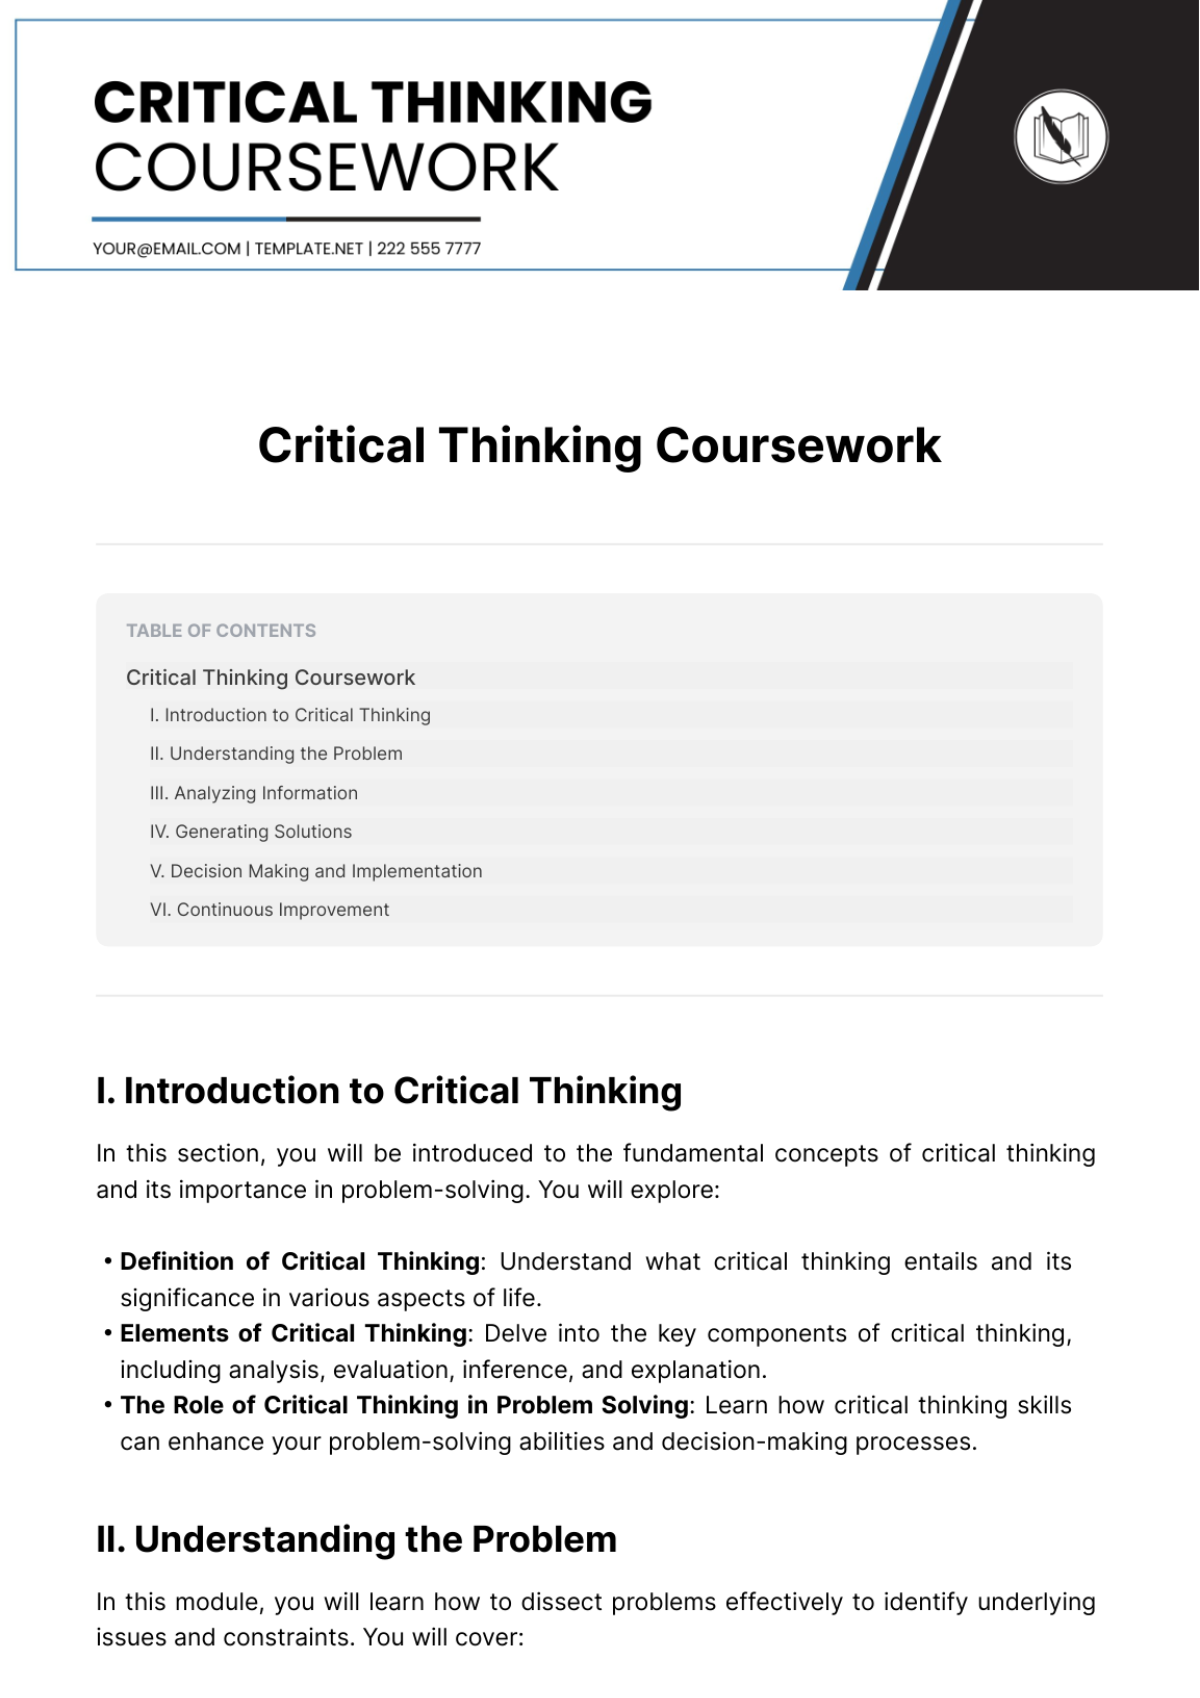 Critical Thinking Coursework Template